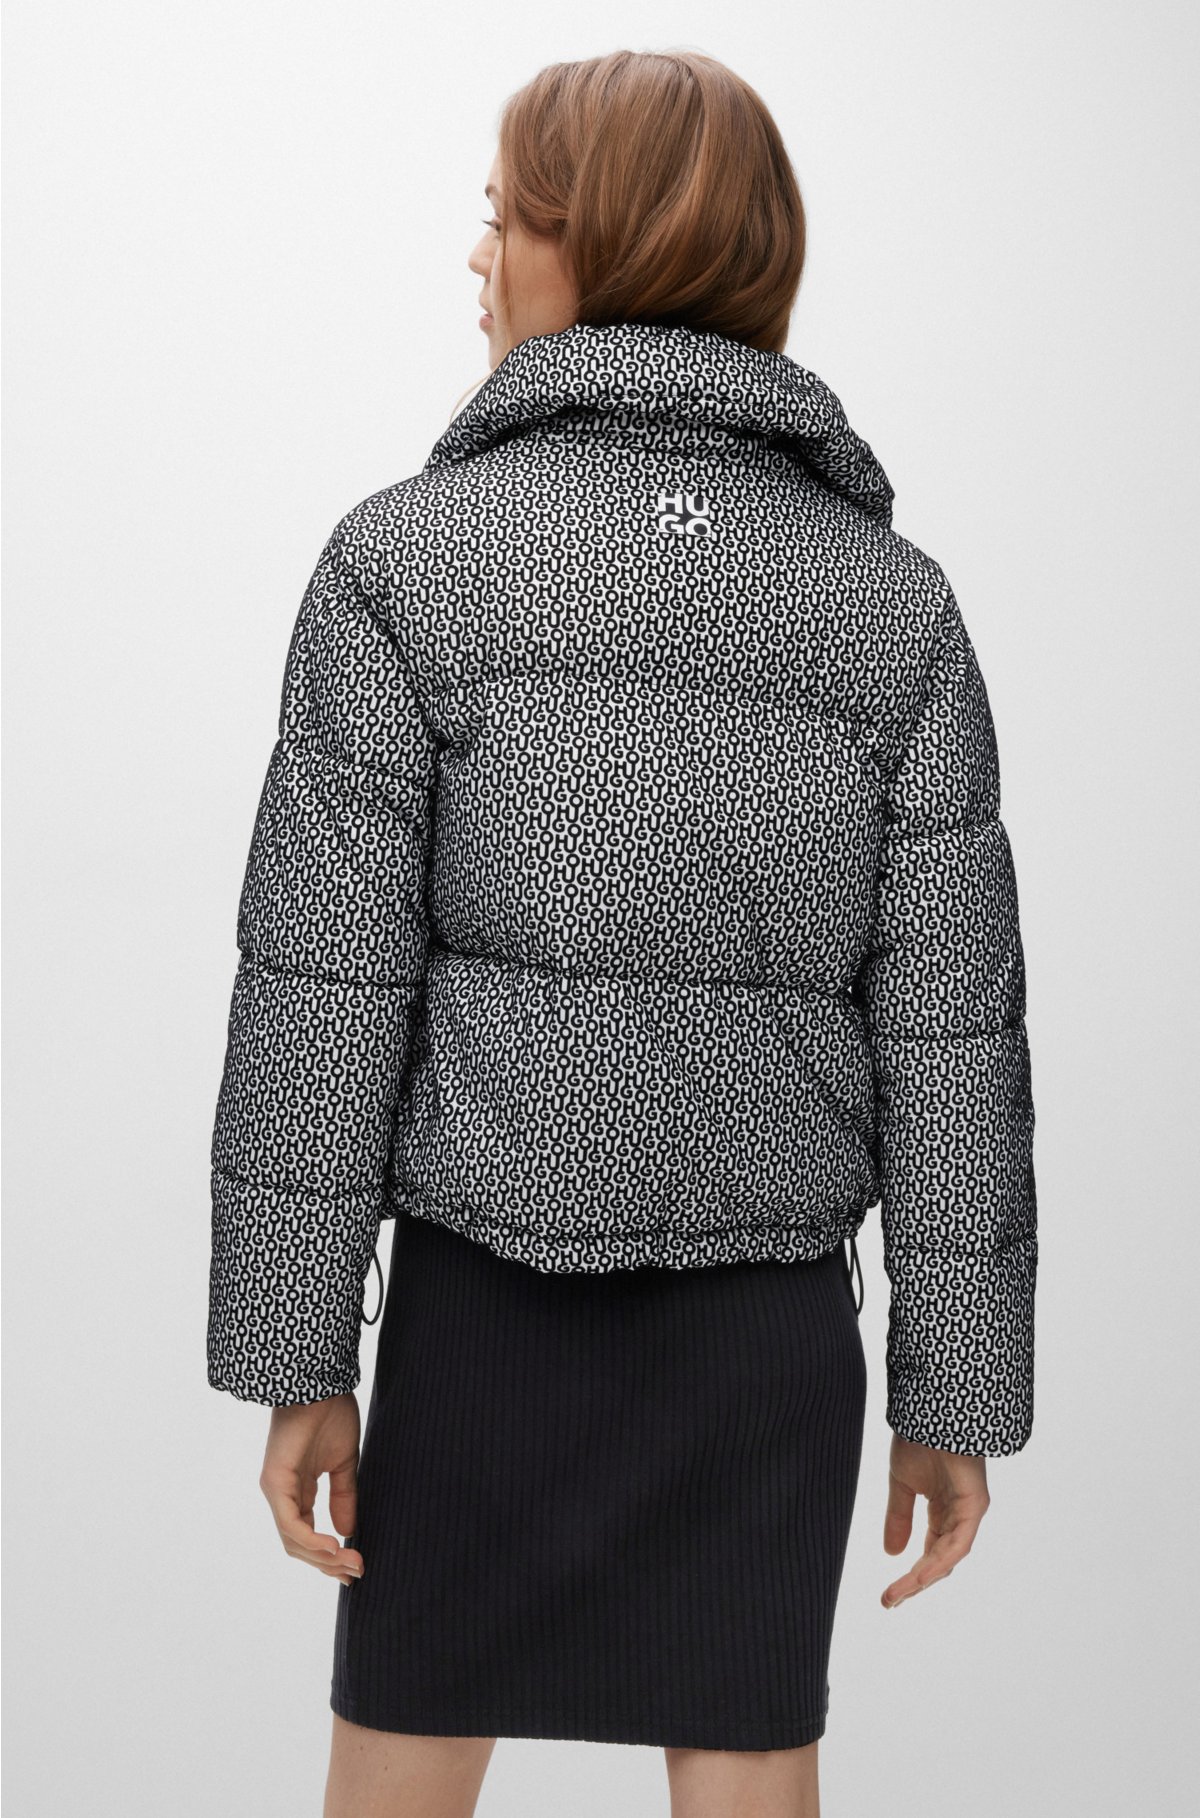 BOSS by HUGO BOSS Boxy-fit Padded Jacket With All-over Monograms in Gray